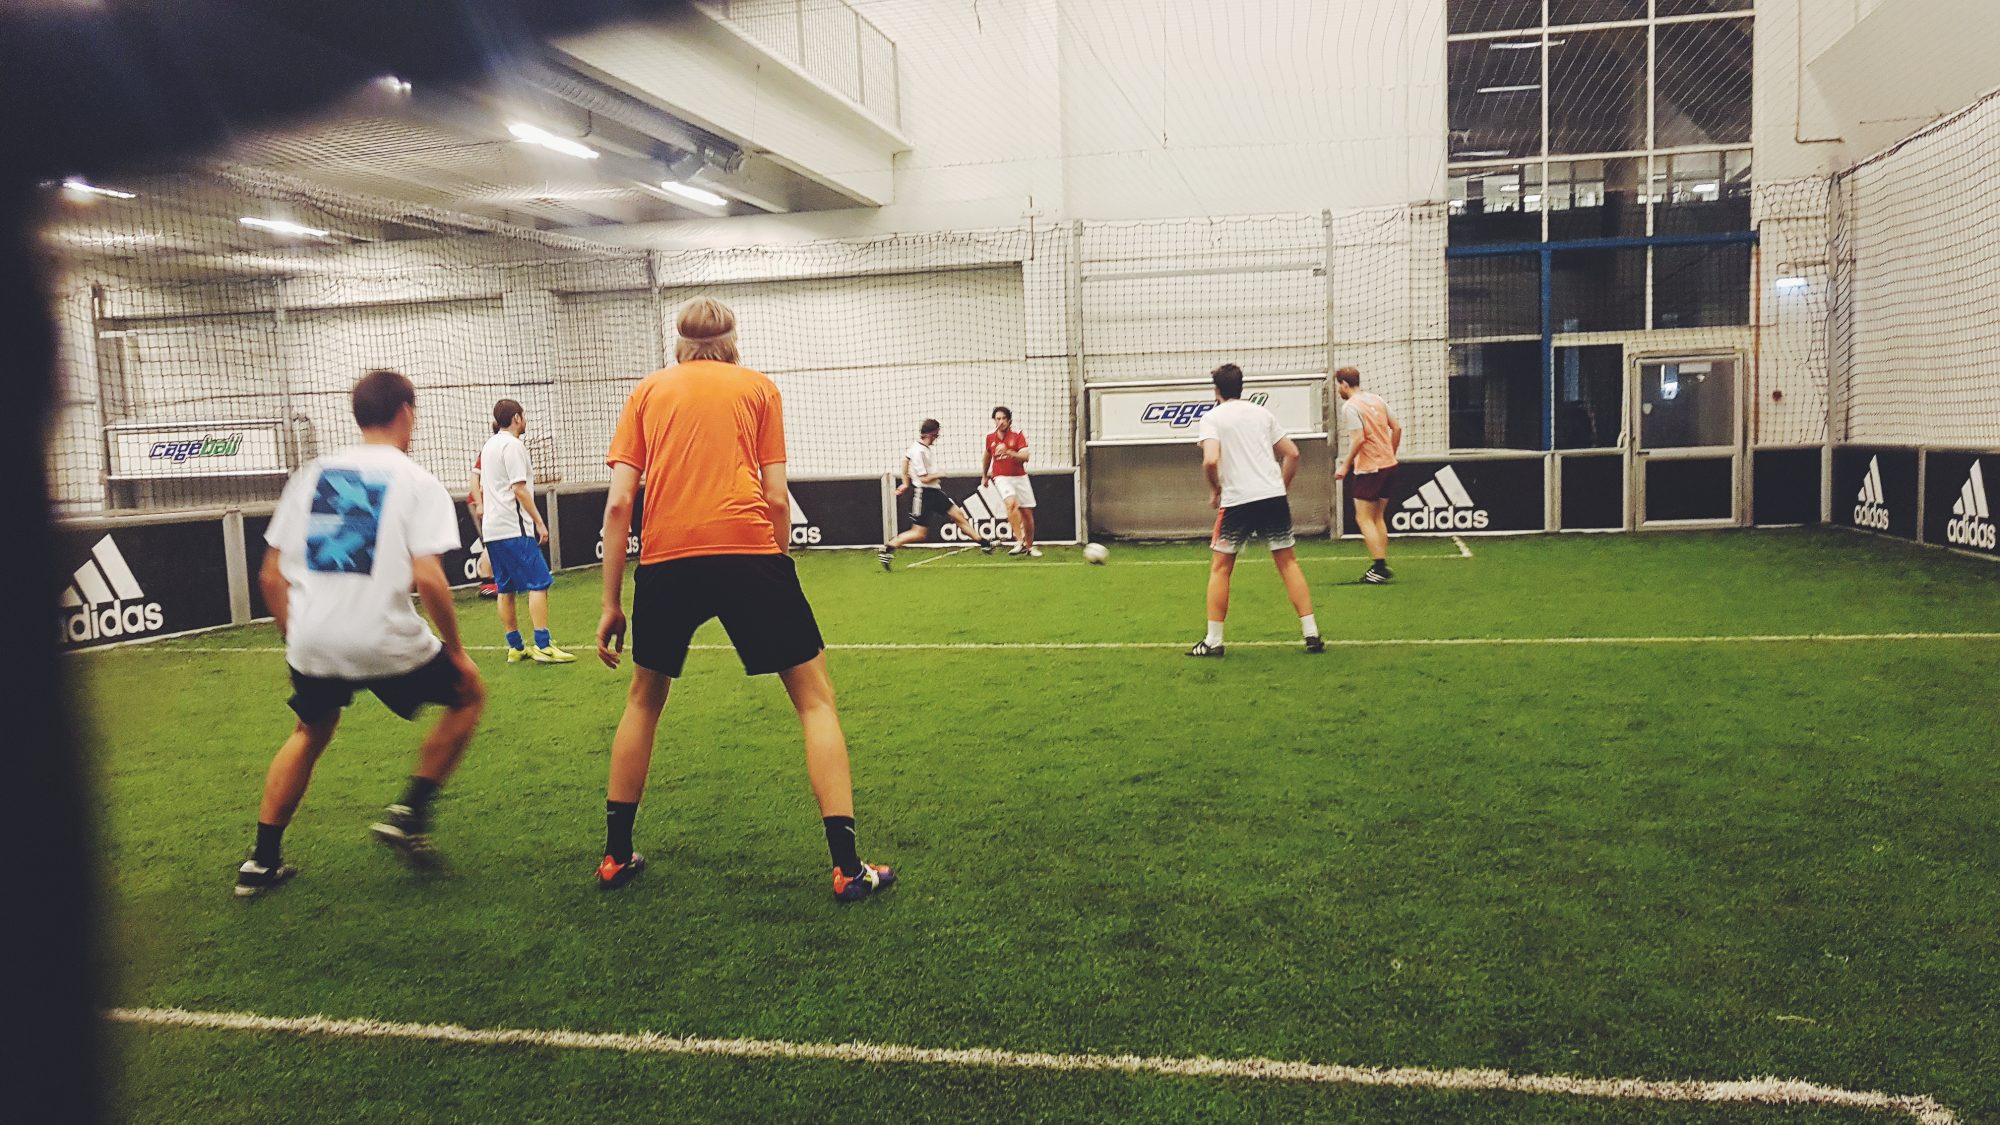 A photo of a small indoor football pitch with a group of boys mid-game, kicking a ball around the surface of the artificial grass.